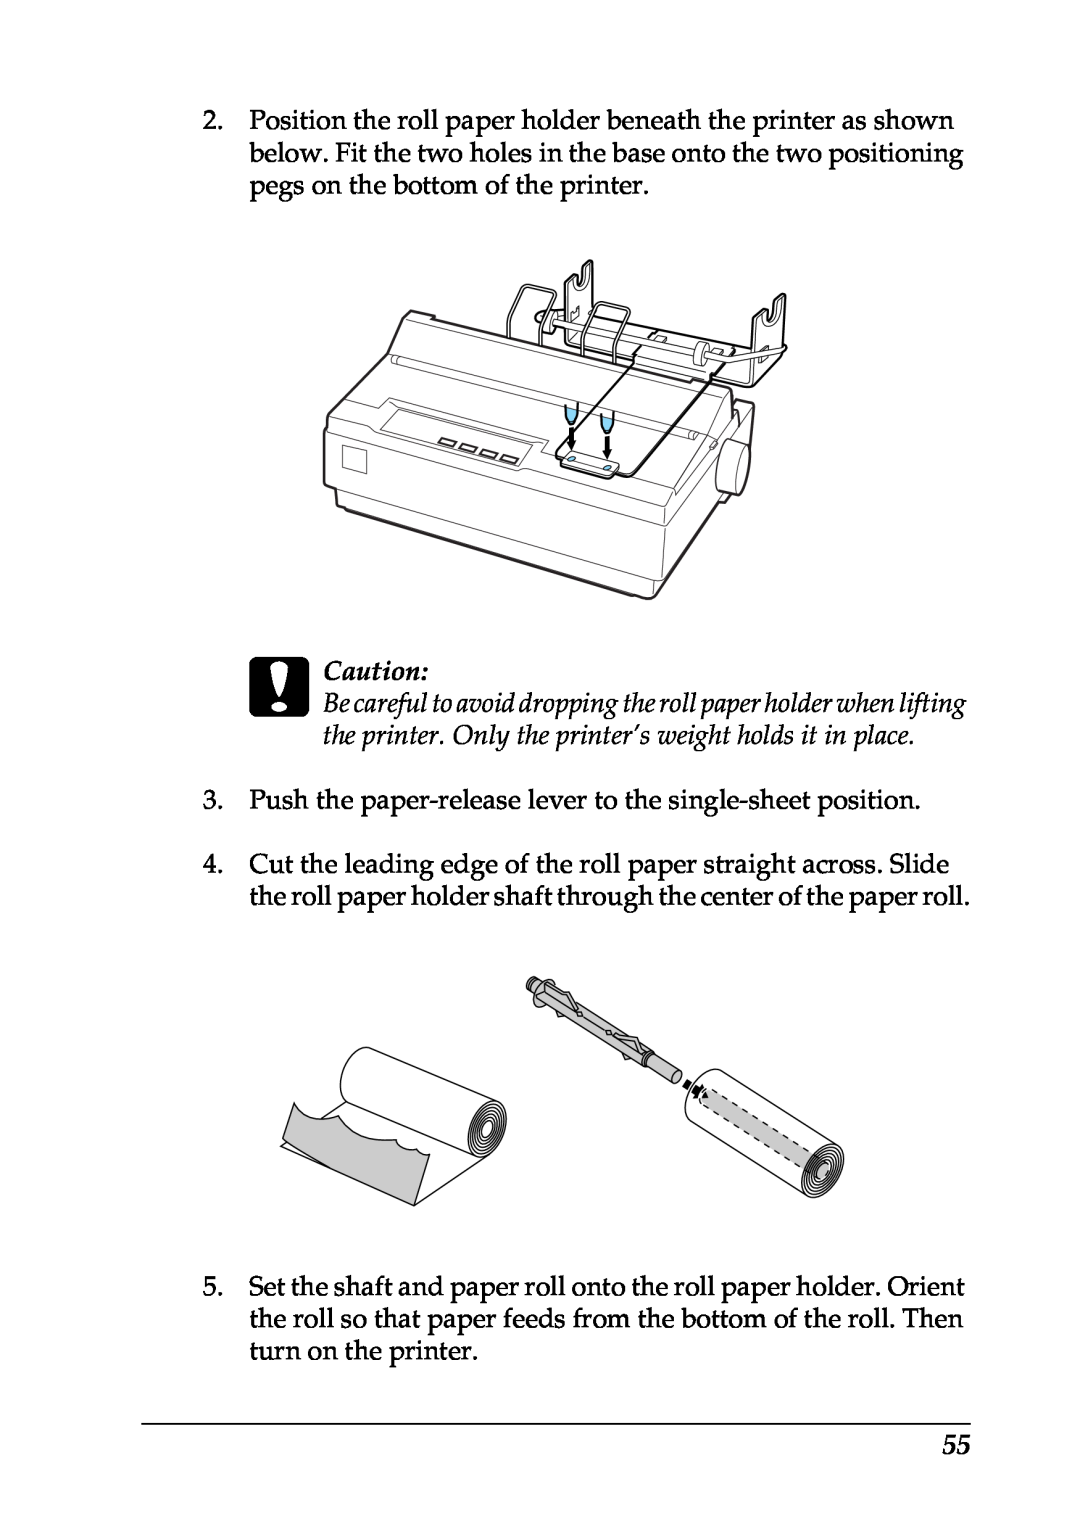 Epson LX-1170 manual c Caution, Push the paper-release lever to the single-sheet position 